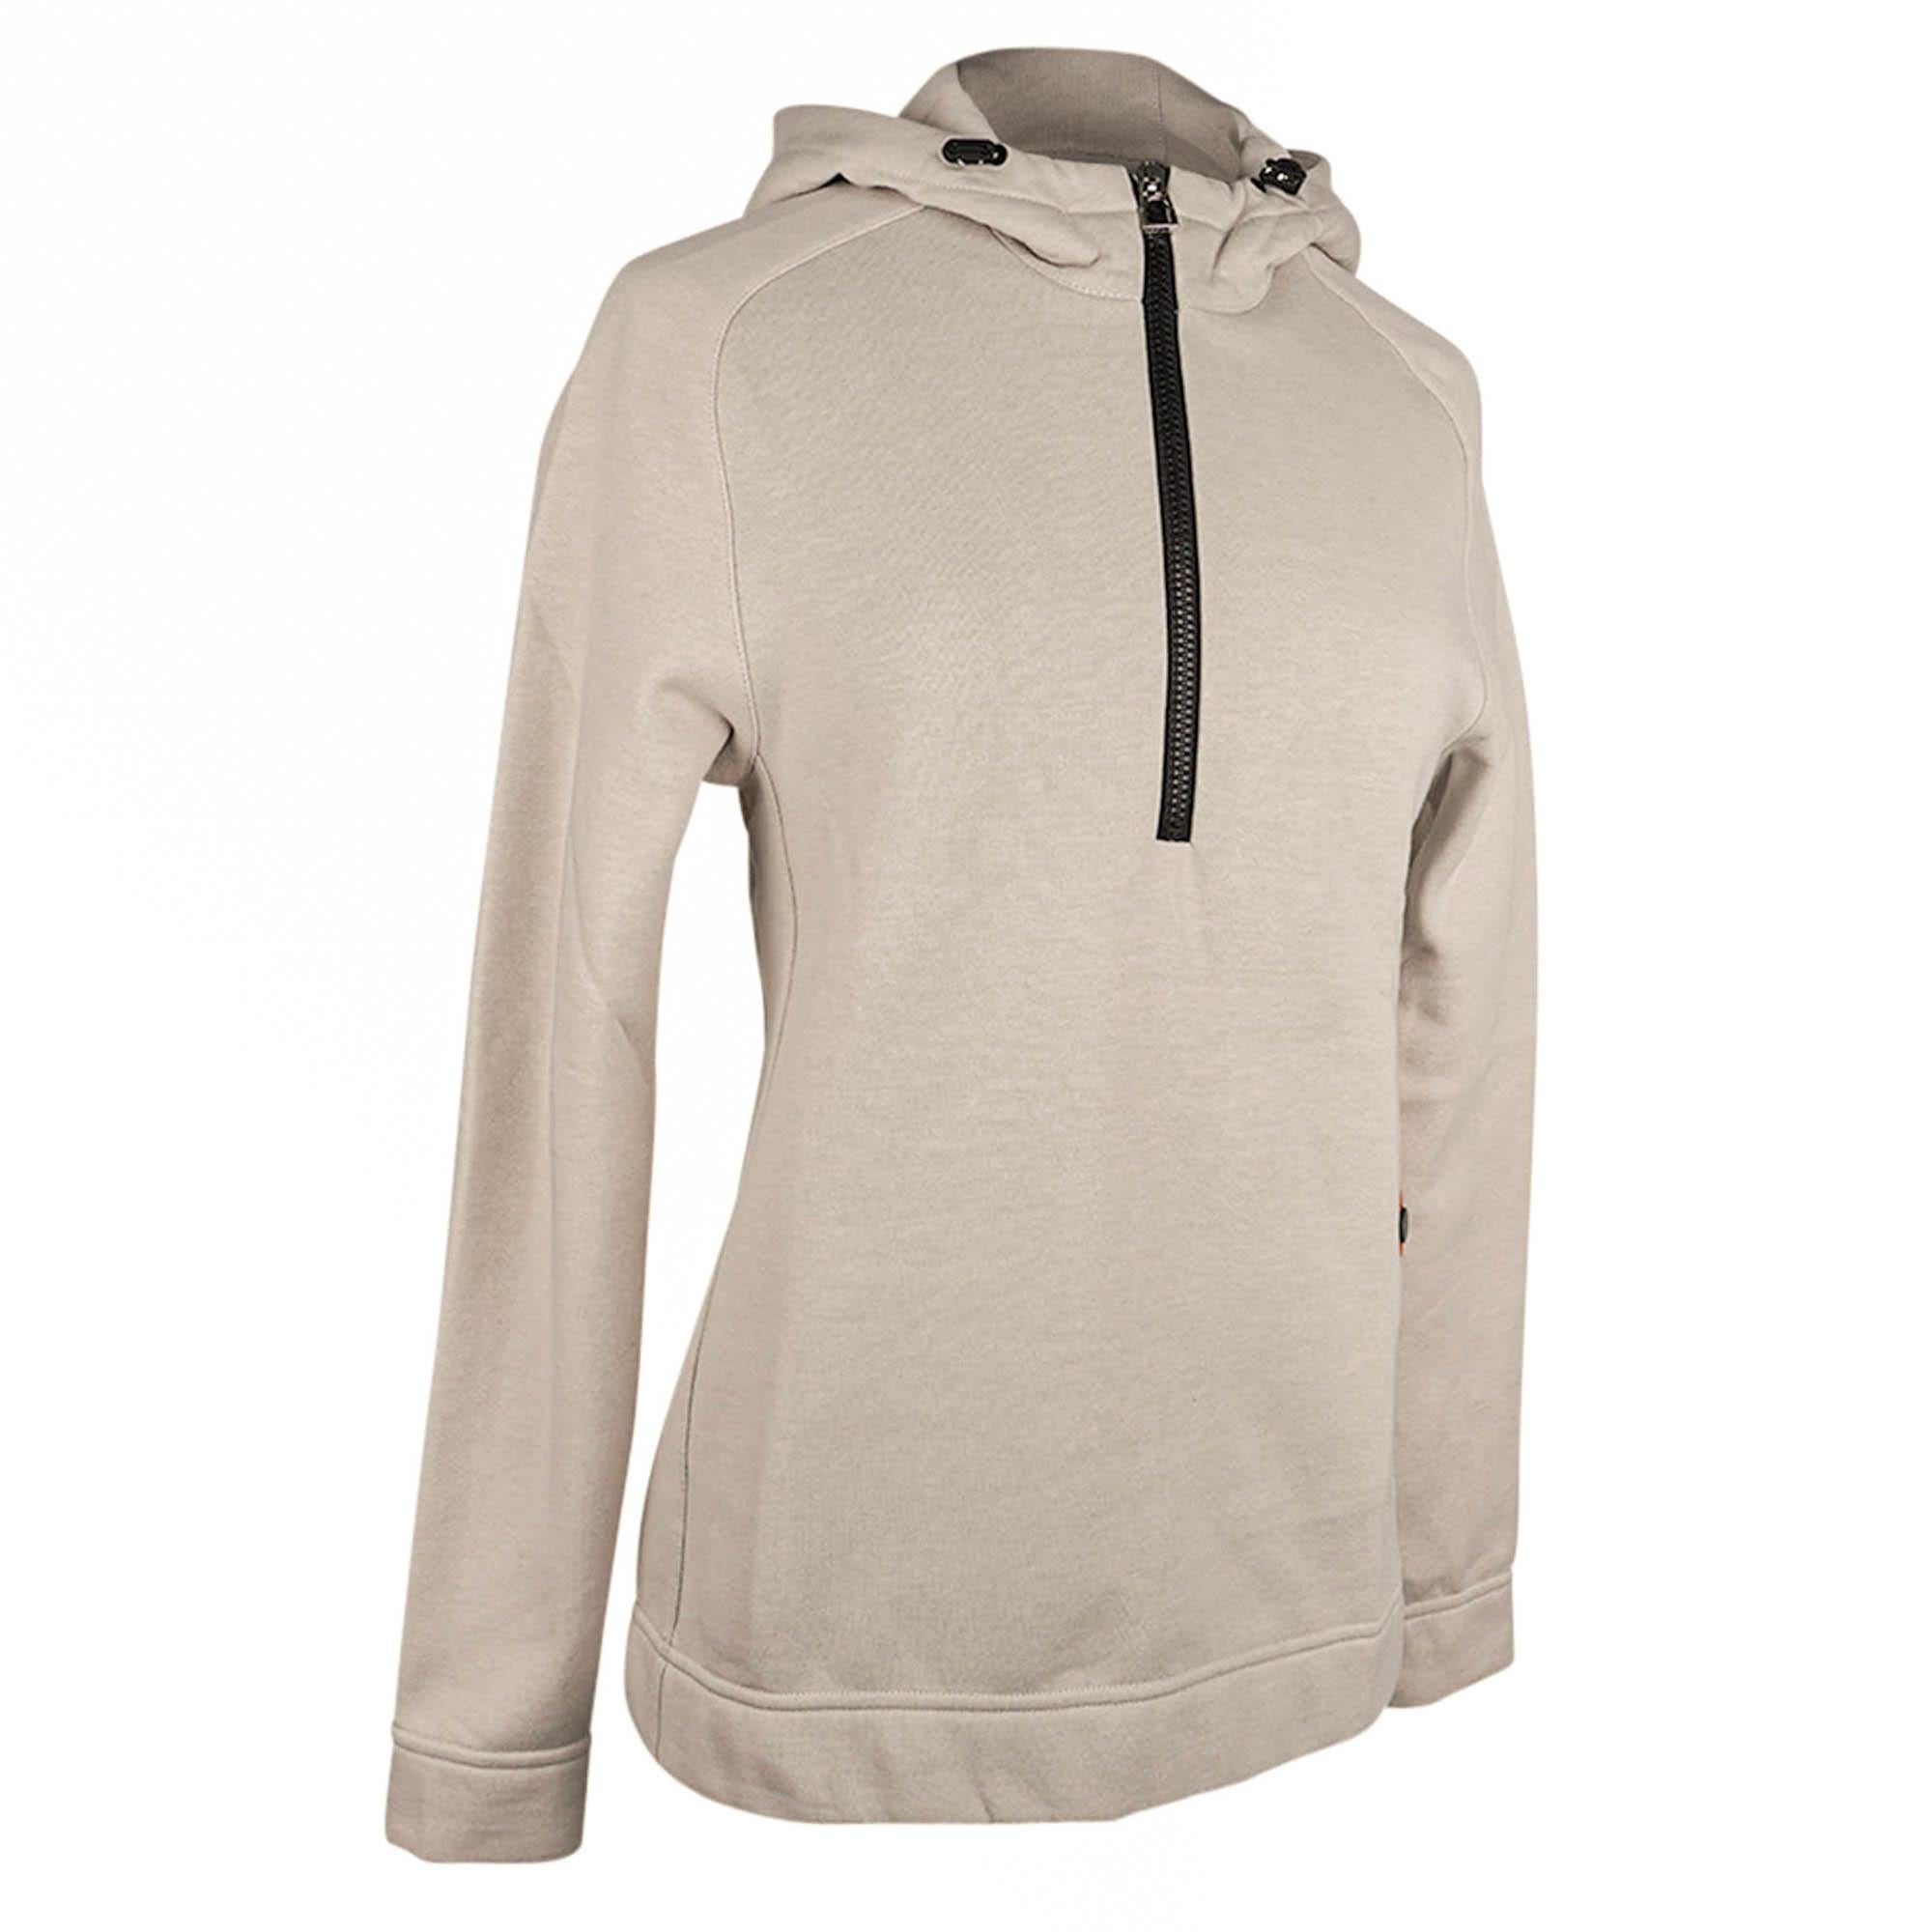 Hermès Fit hooded sweatshirt featured in Gris Carriere.
Front zip with logo pull.
Hood has drawstring with a cord lock.
Fabric breathable with thermo-regulating properties.
Orange lined exterior pocket on the left side with Clou de Selle snap